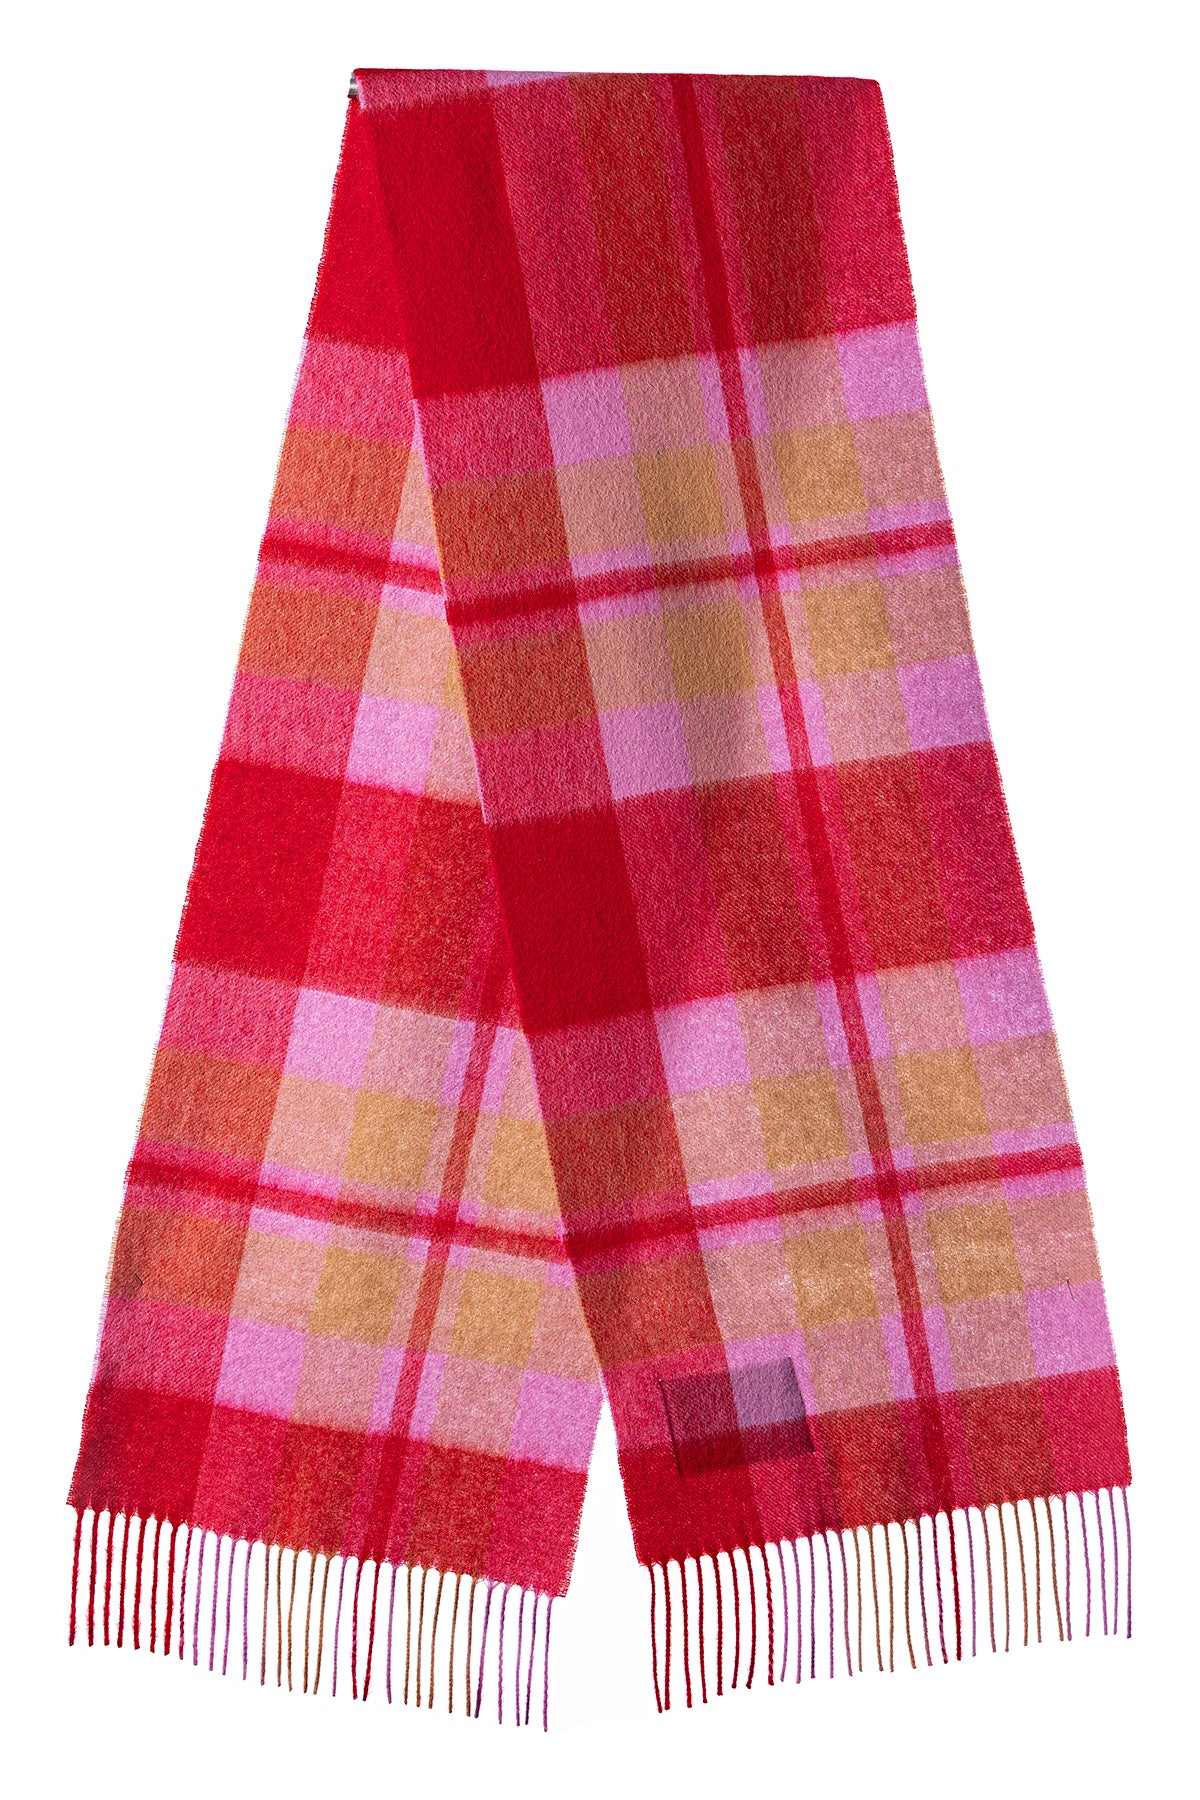 100% Pure Lambswool Scarf DC Red/Camel